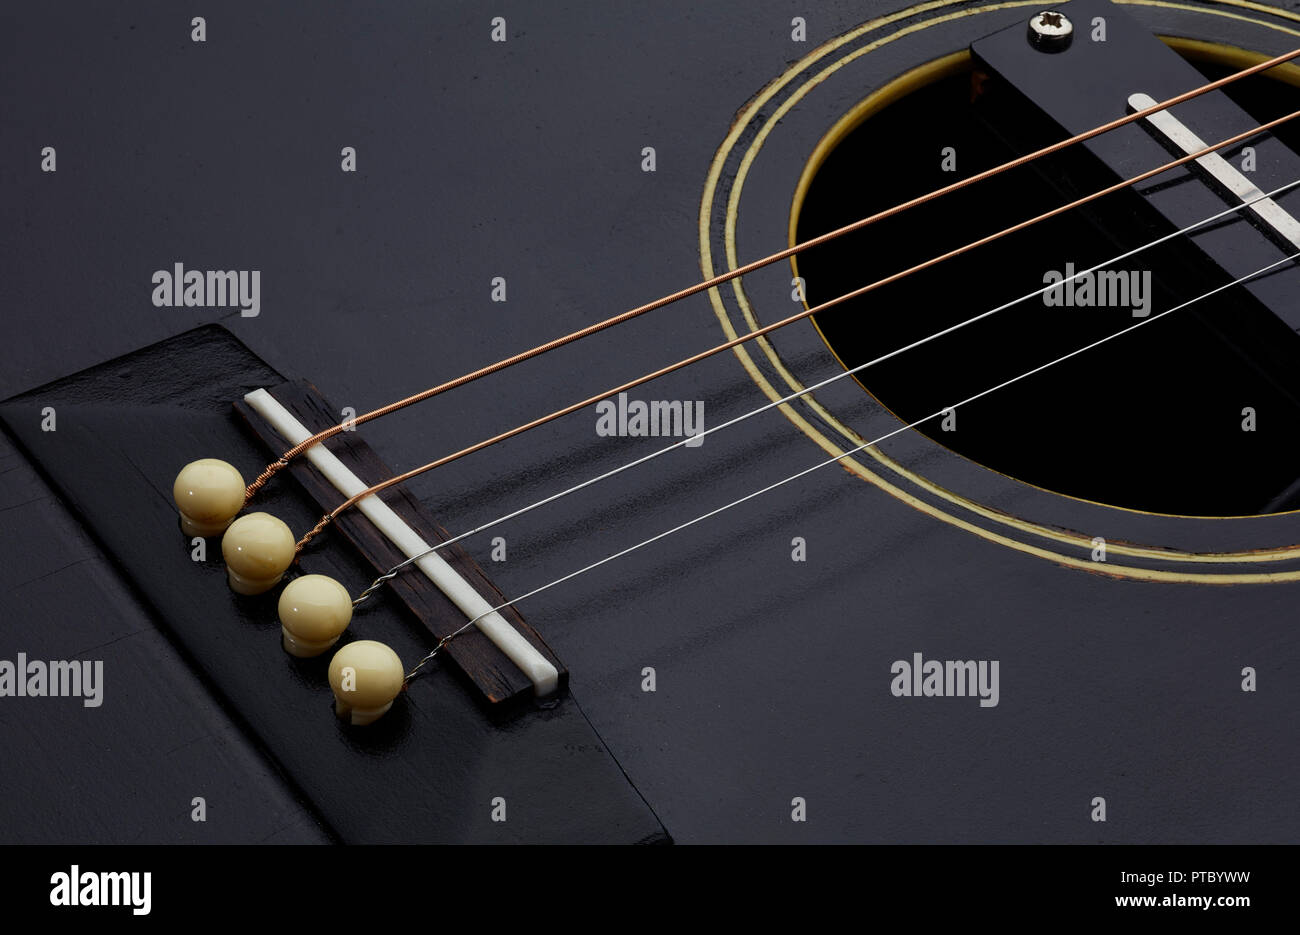 Gibson TG1 detail showing how strings fit with pegs Stock Photo